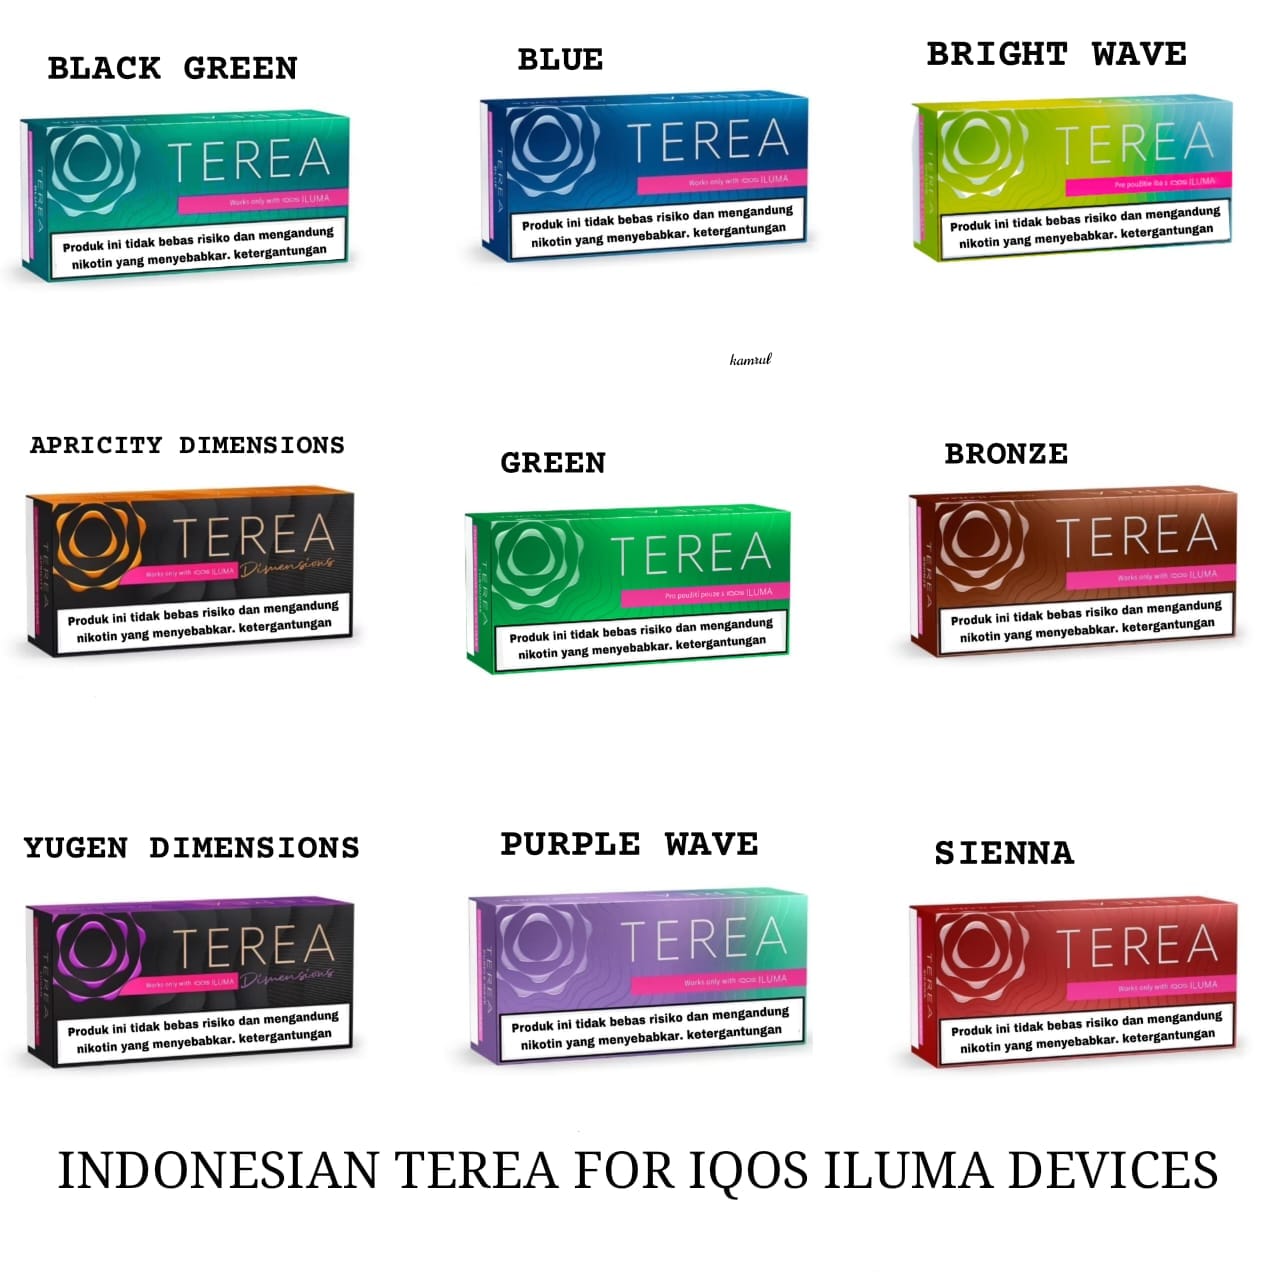 IQOS Terea Dimensions Apricity Indonesian